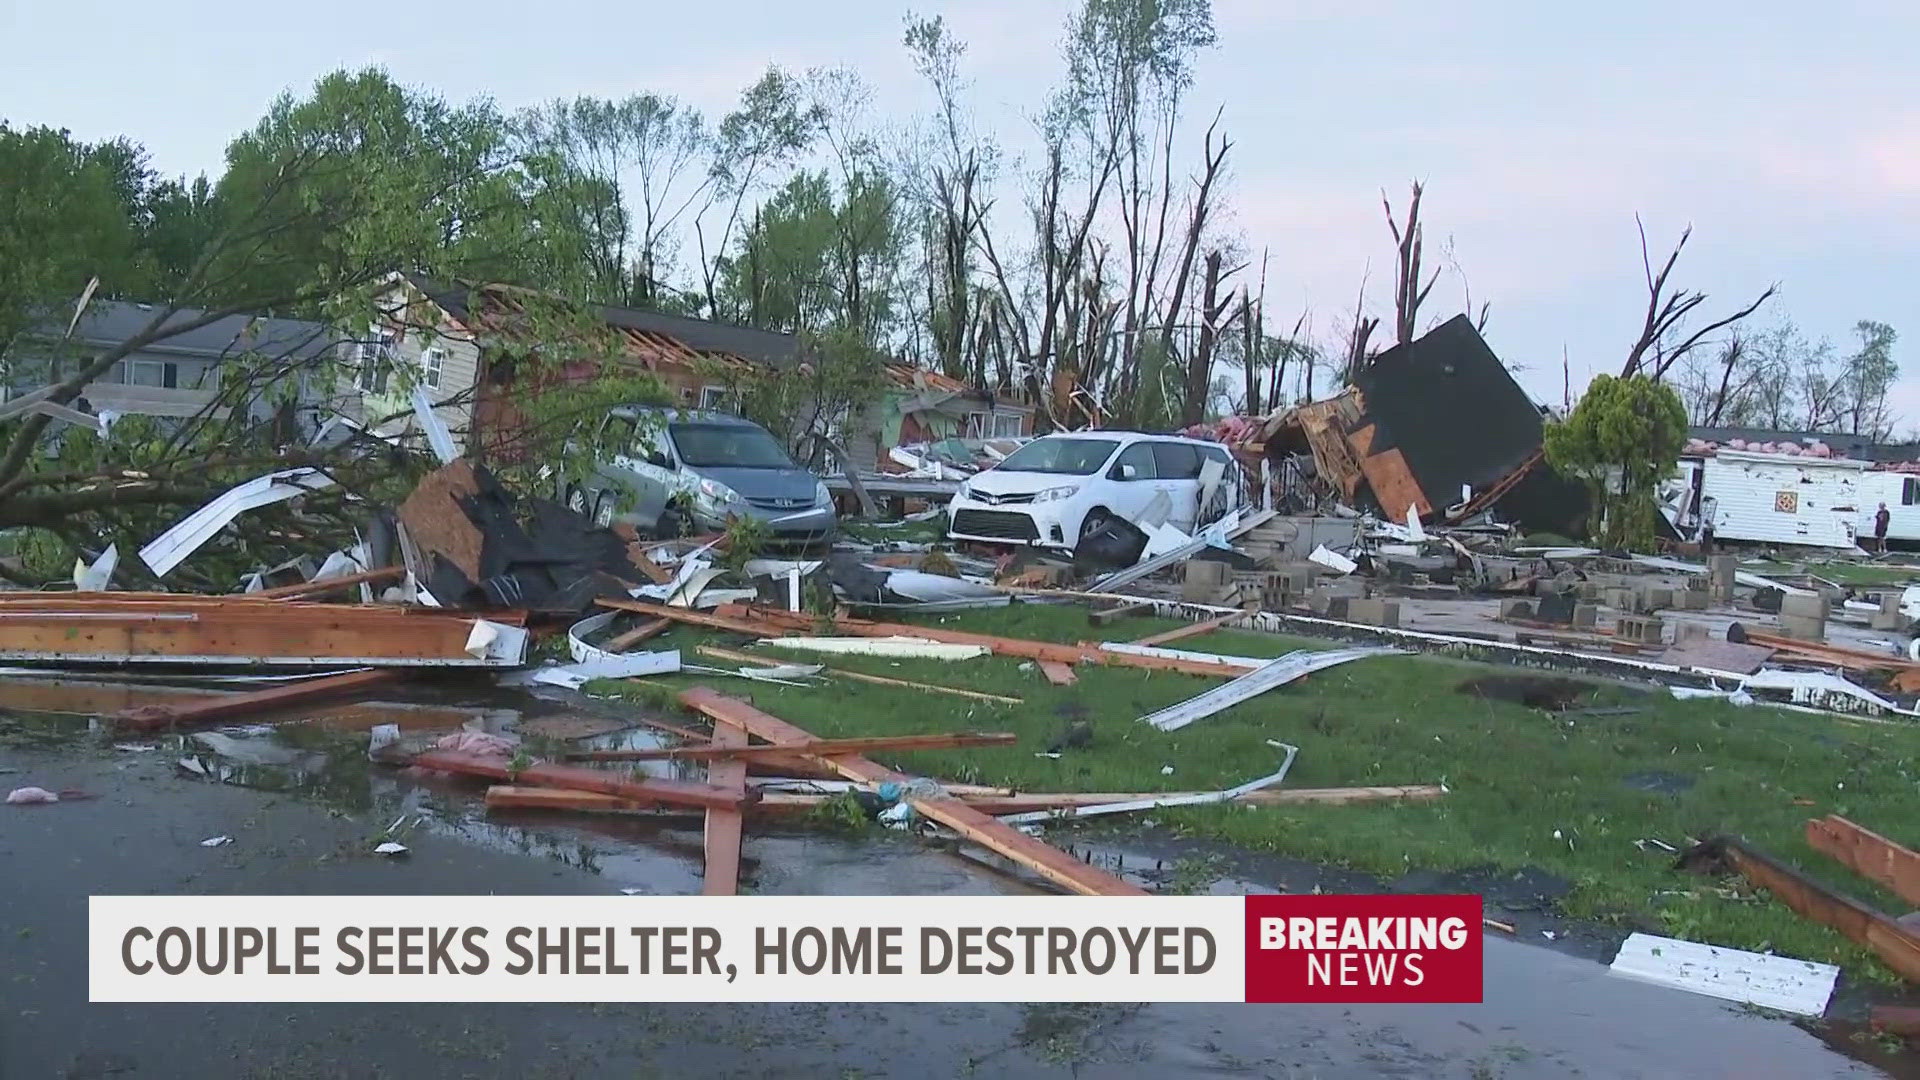 Severe storms hit the Midwest a day after deadly tornado